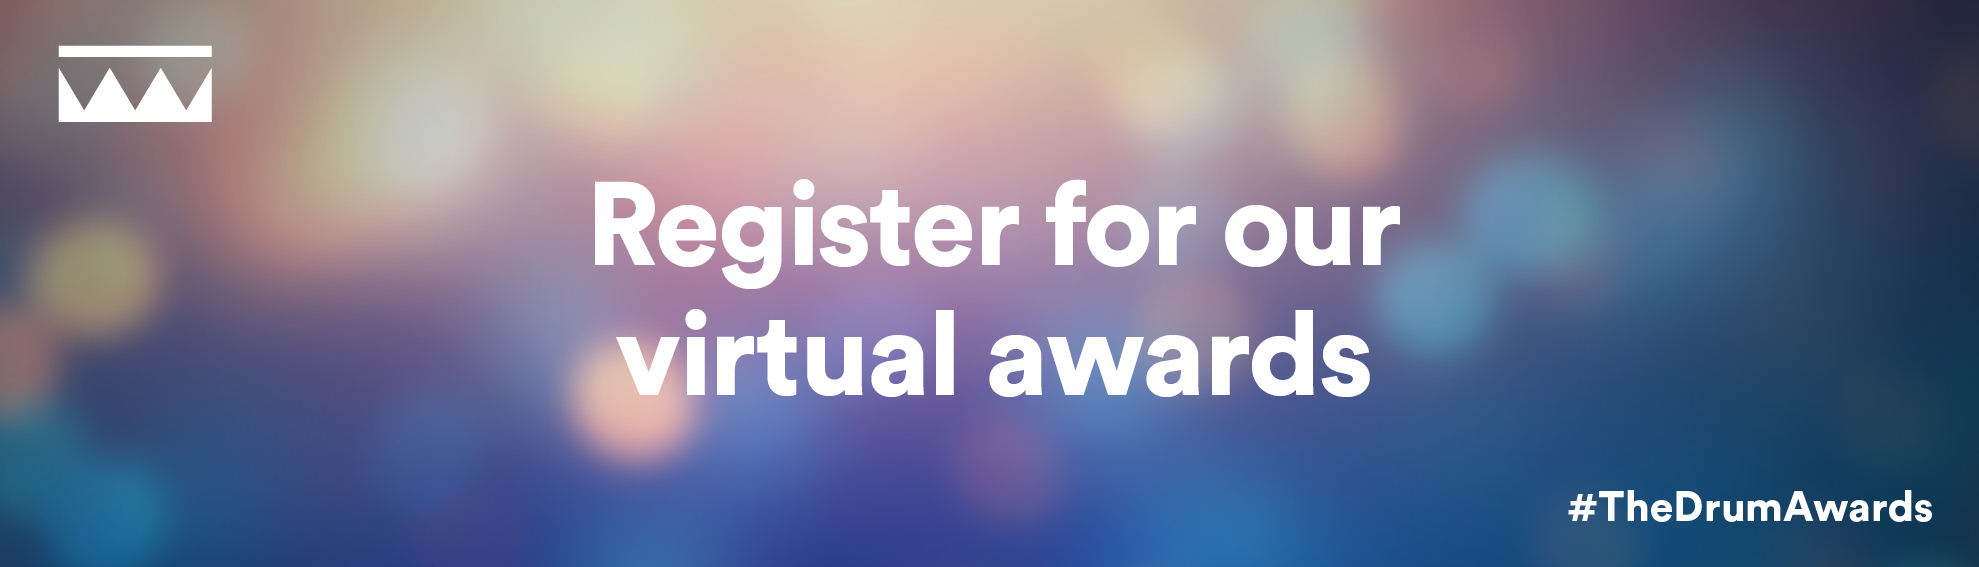 Register for our virtual awards